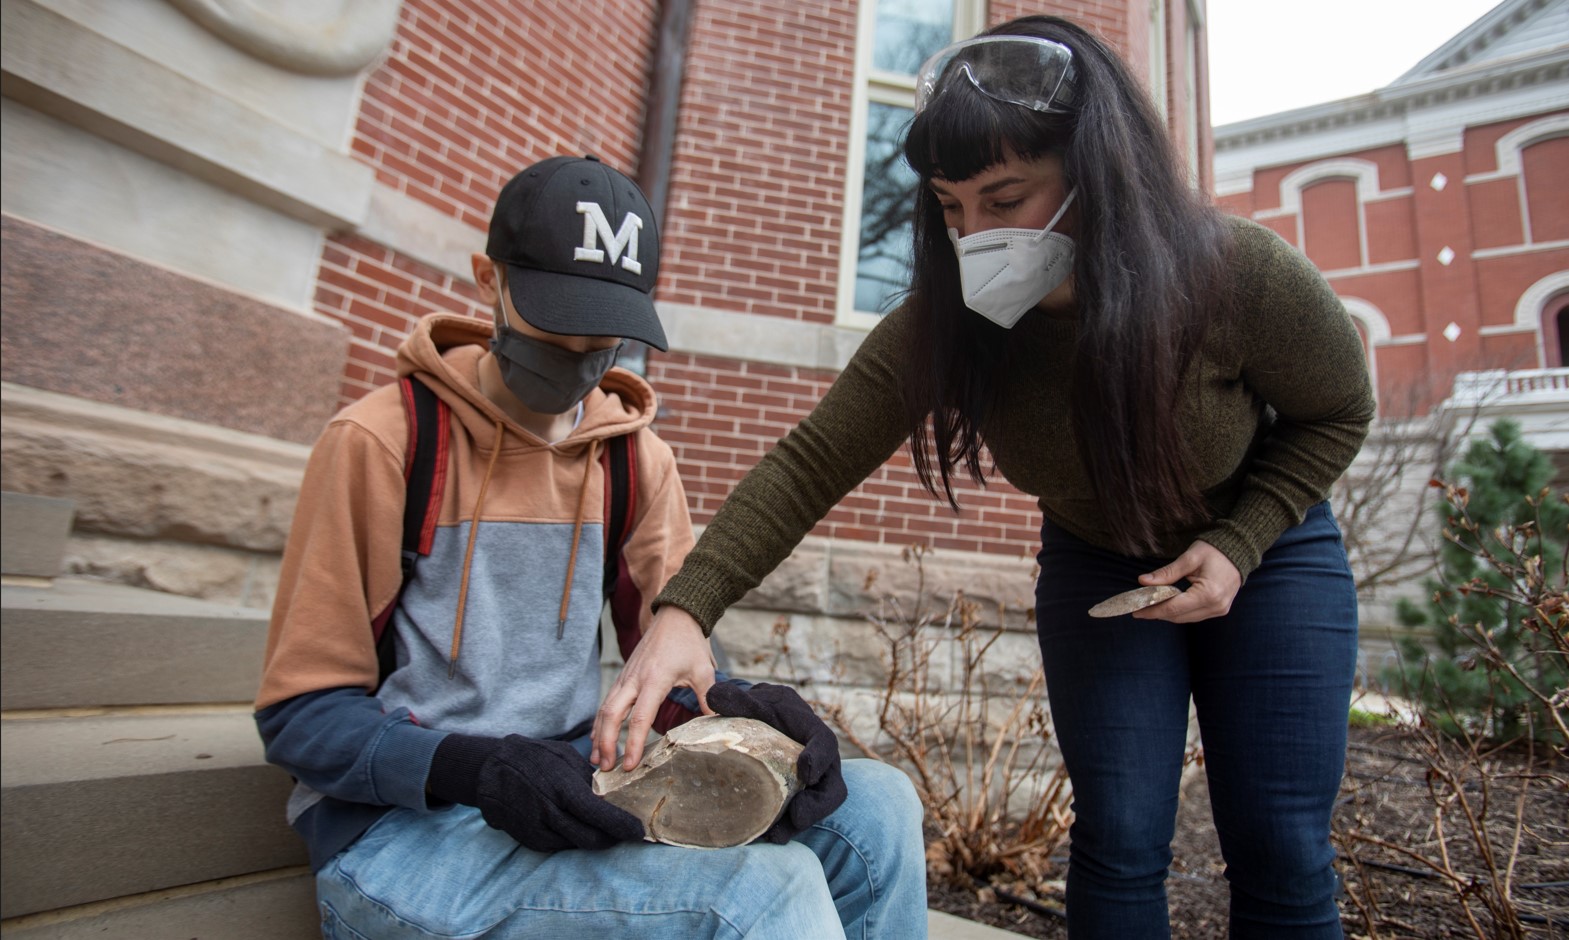 Professor Libby Cowgill uses experiential learning to teach anthropology students about the lives of early humans and our ancestors.